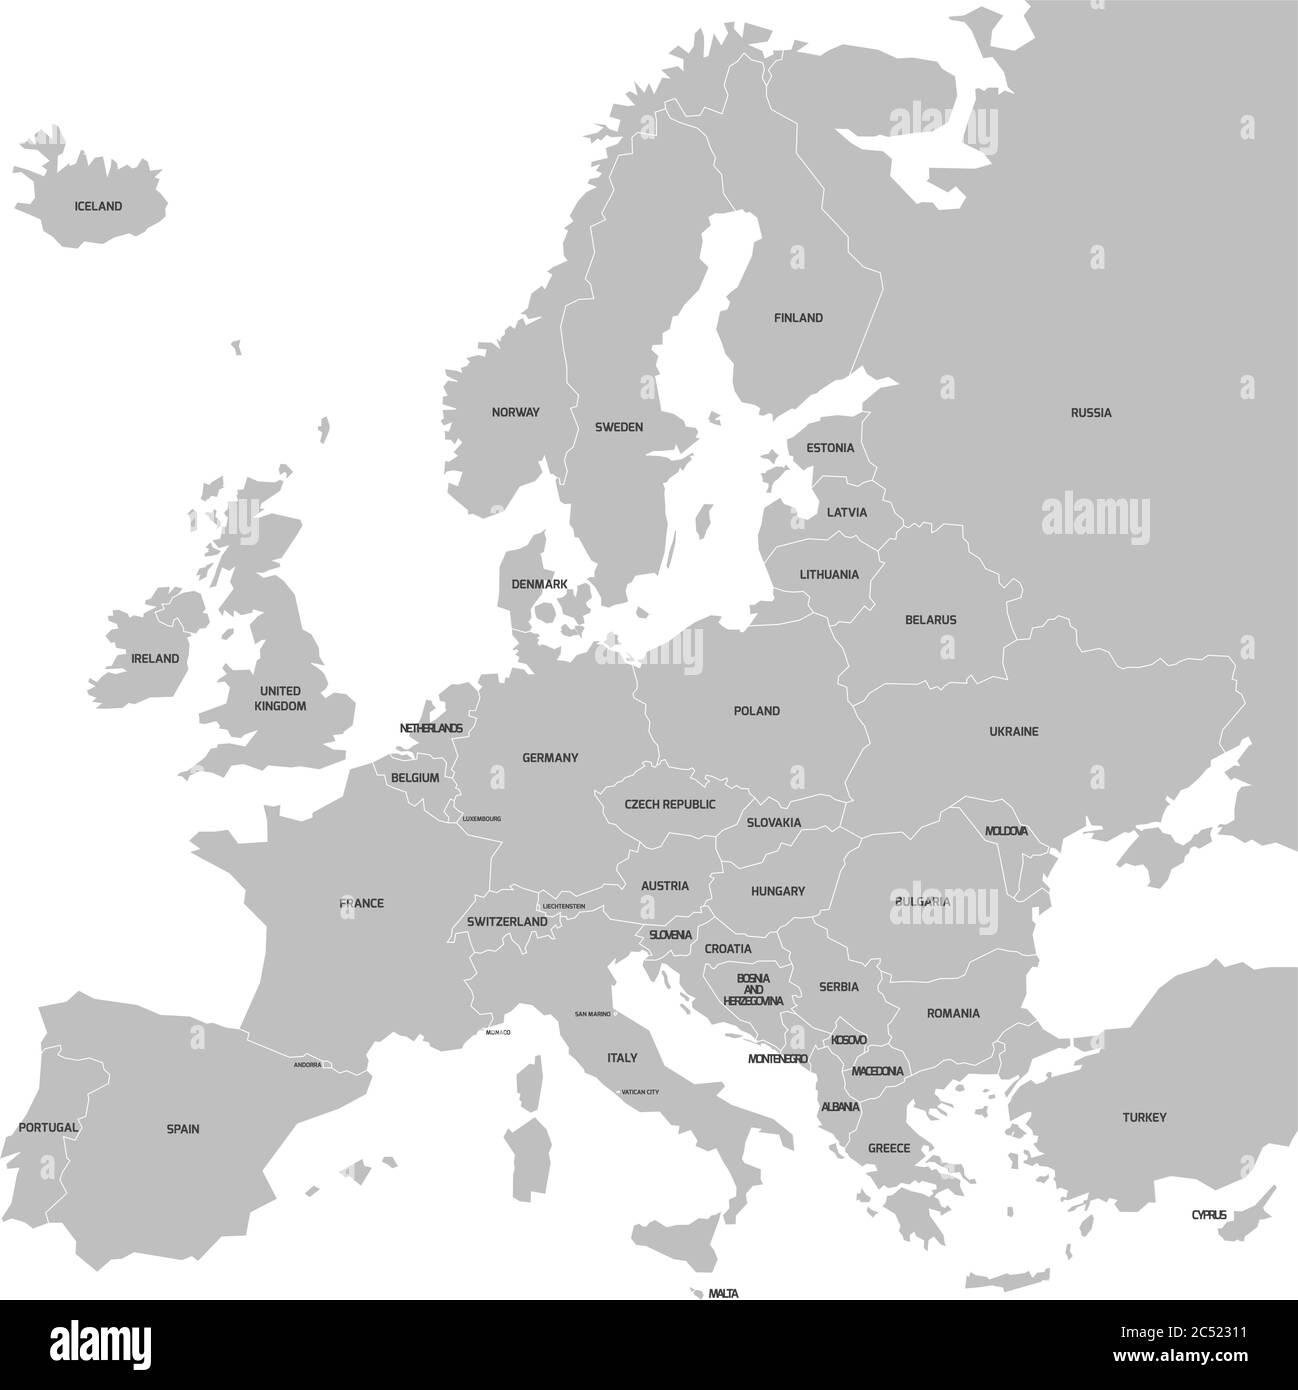 Map of Europe with names of sovereign countries, ministates included. Simplified dark grey vector map on white background. Stock Vector